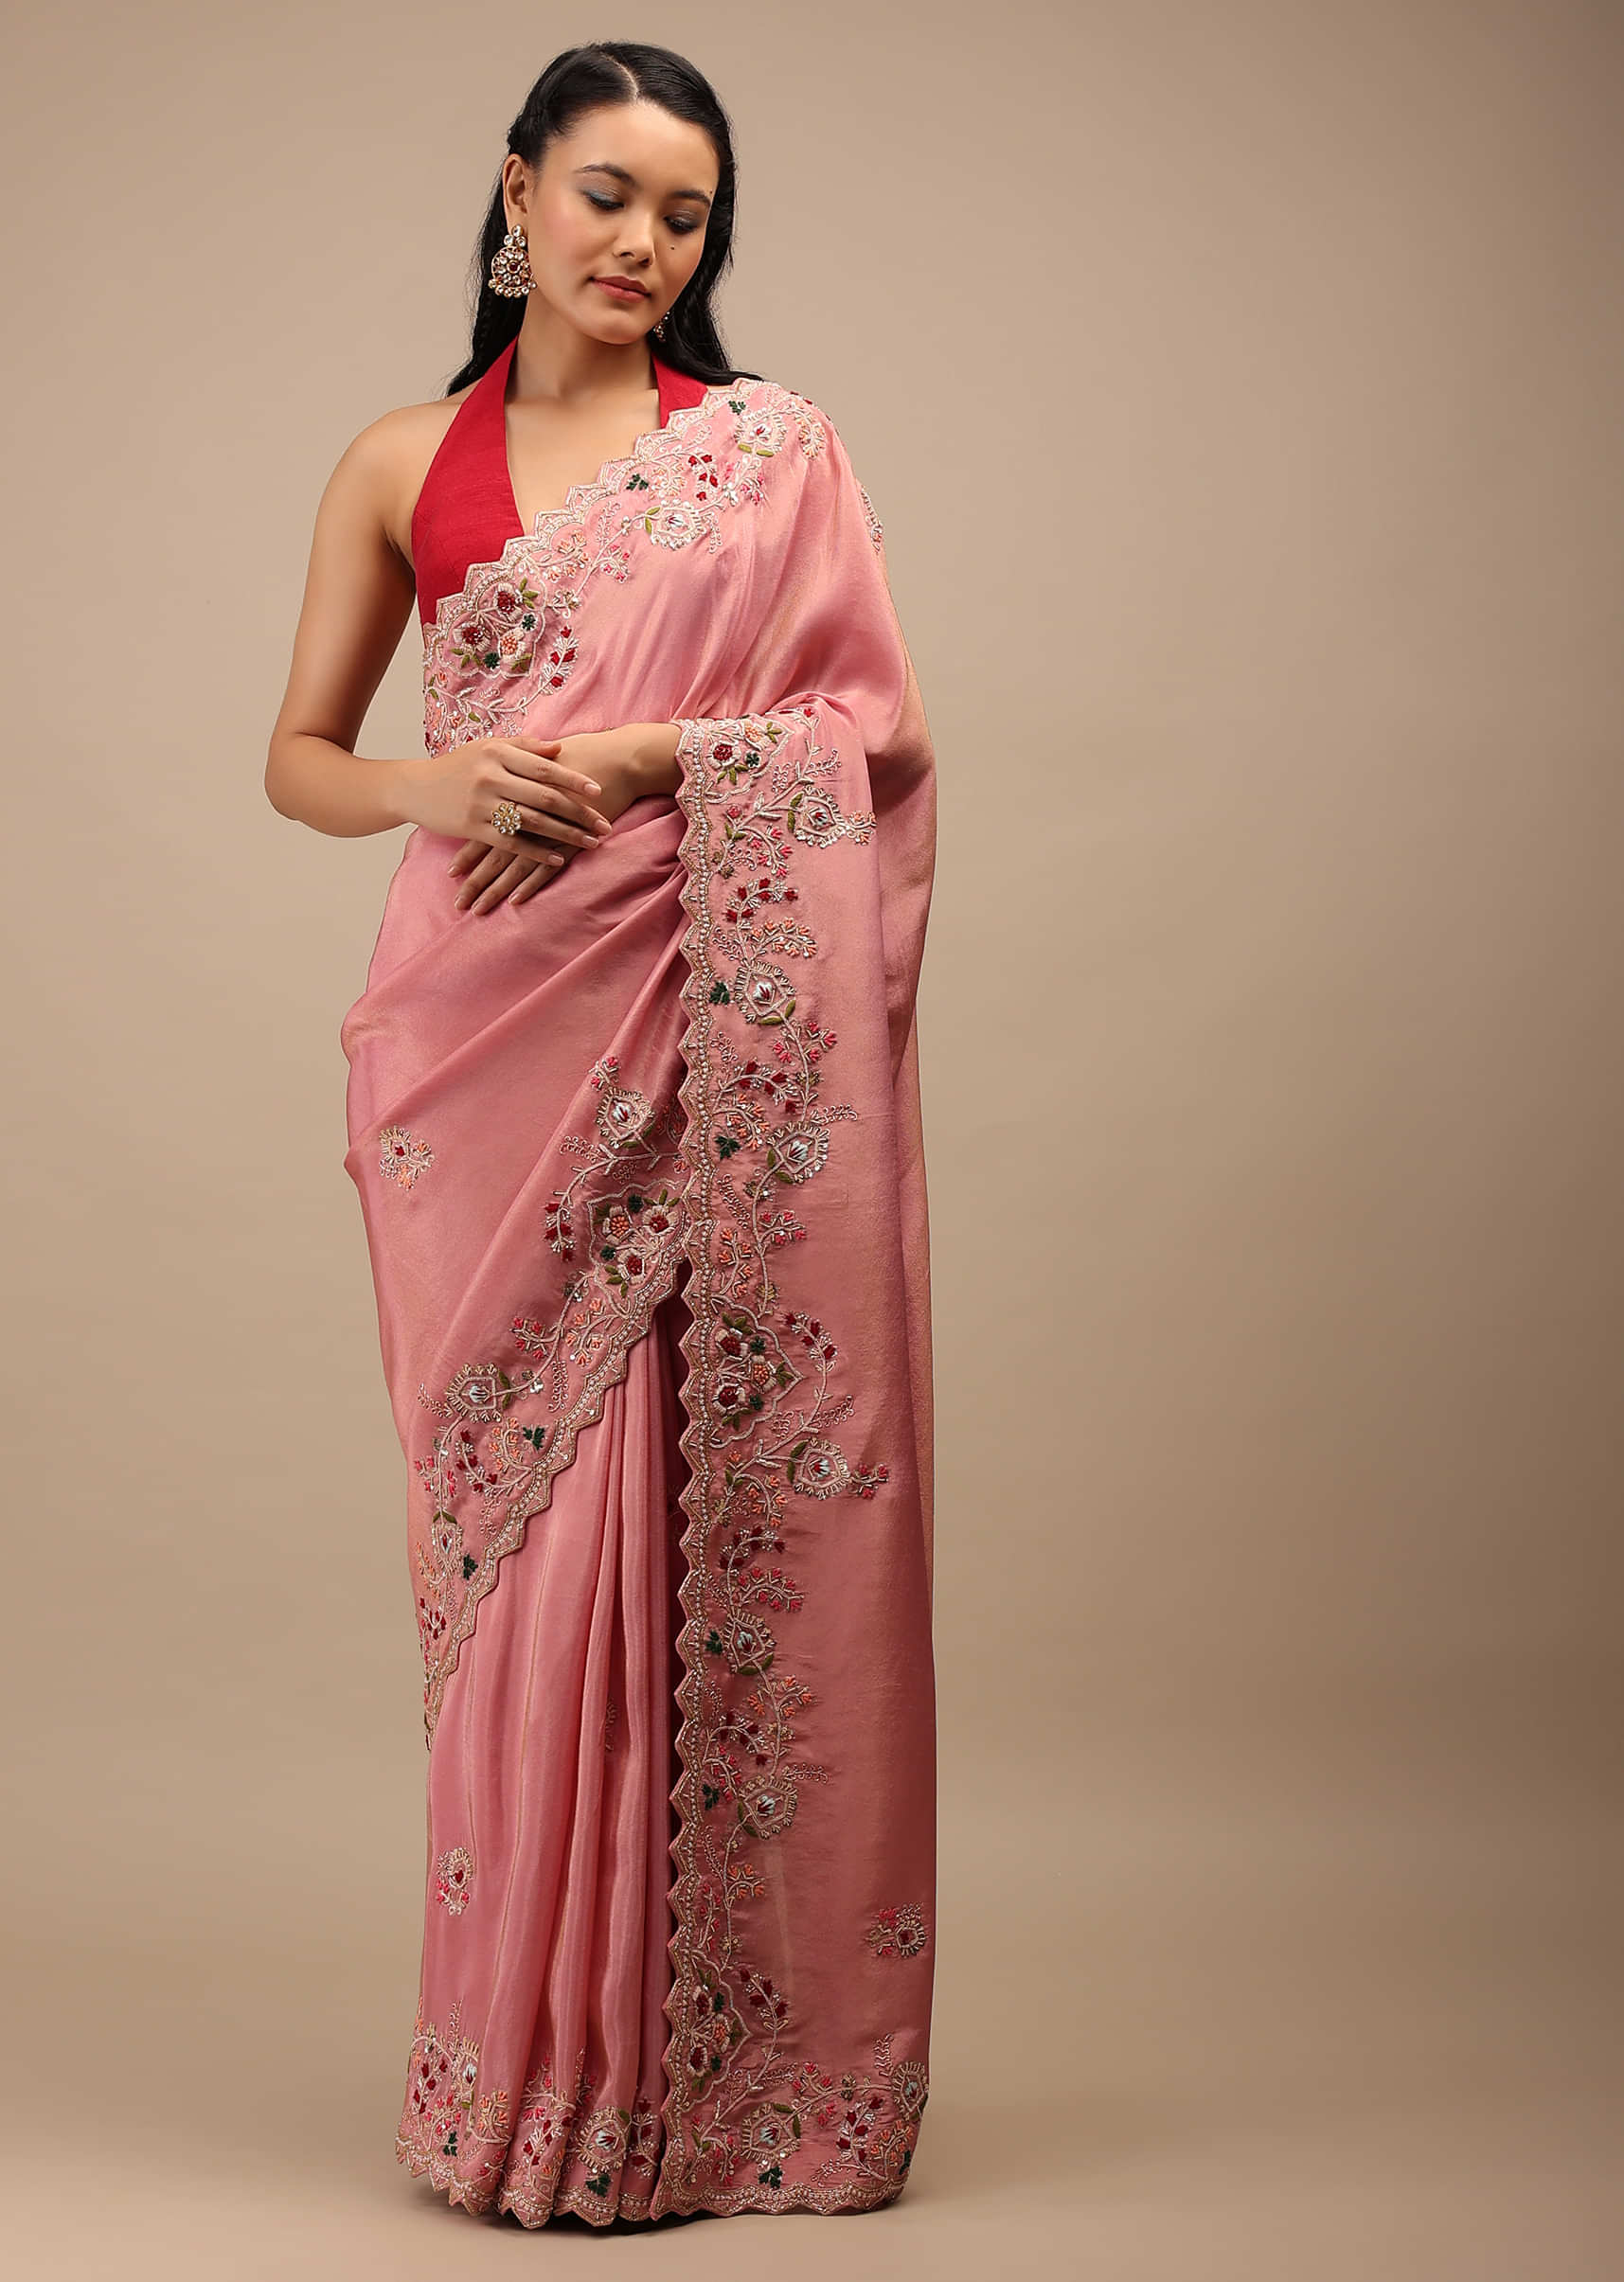 Blush Pink Tissue Saree In Pink French Knots And Zardozi Embroidery Buttiis, Embroidery Detailing Work On Border